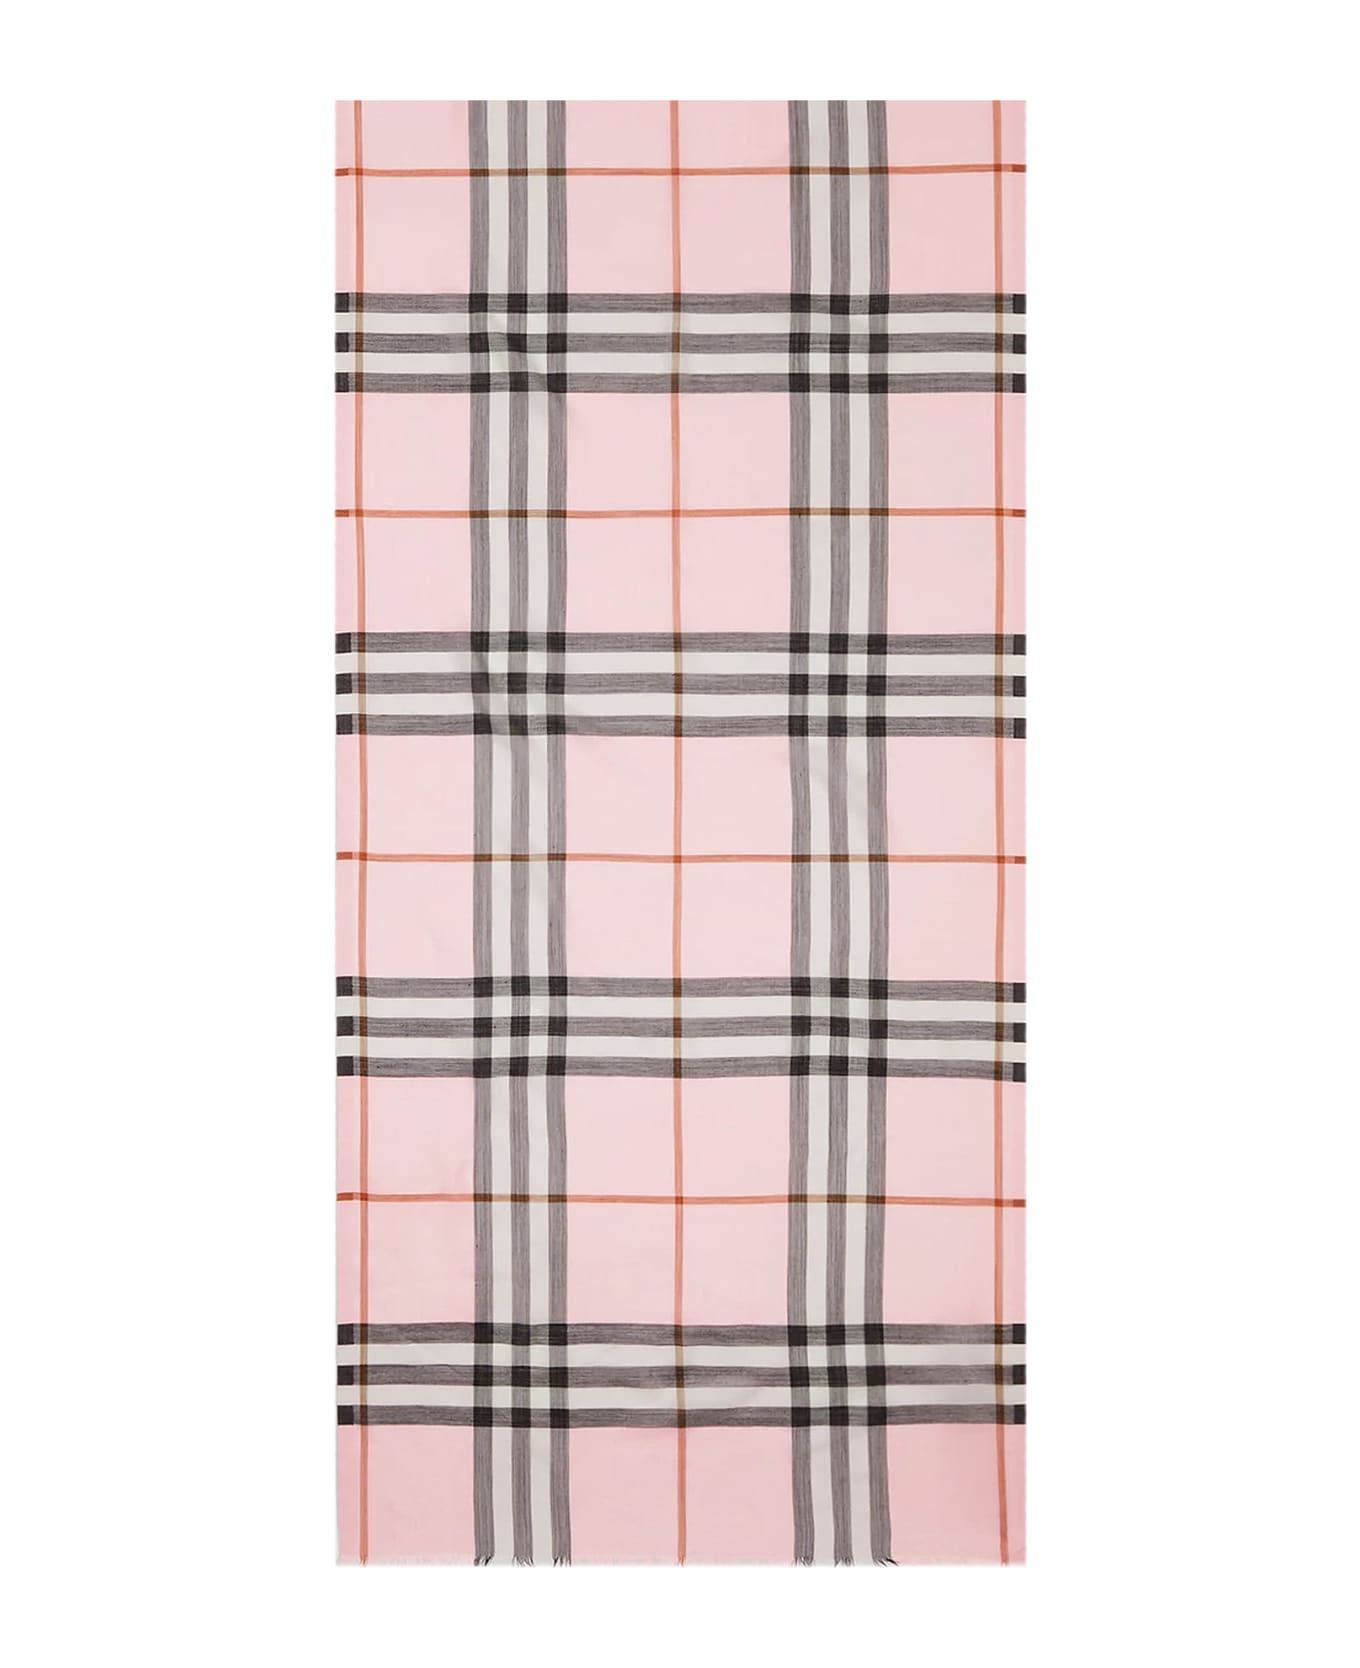 Burberry Scarf - Pink